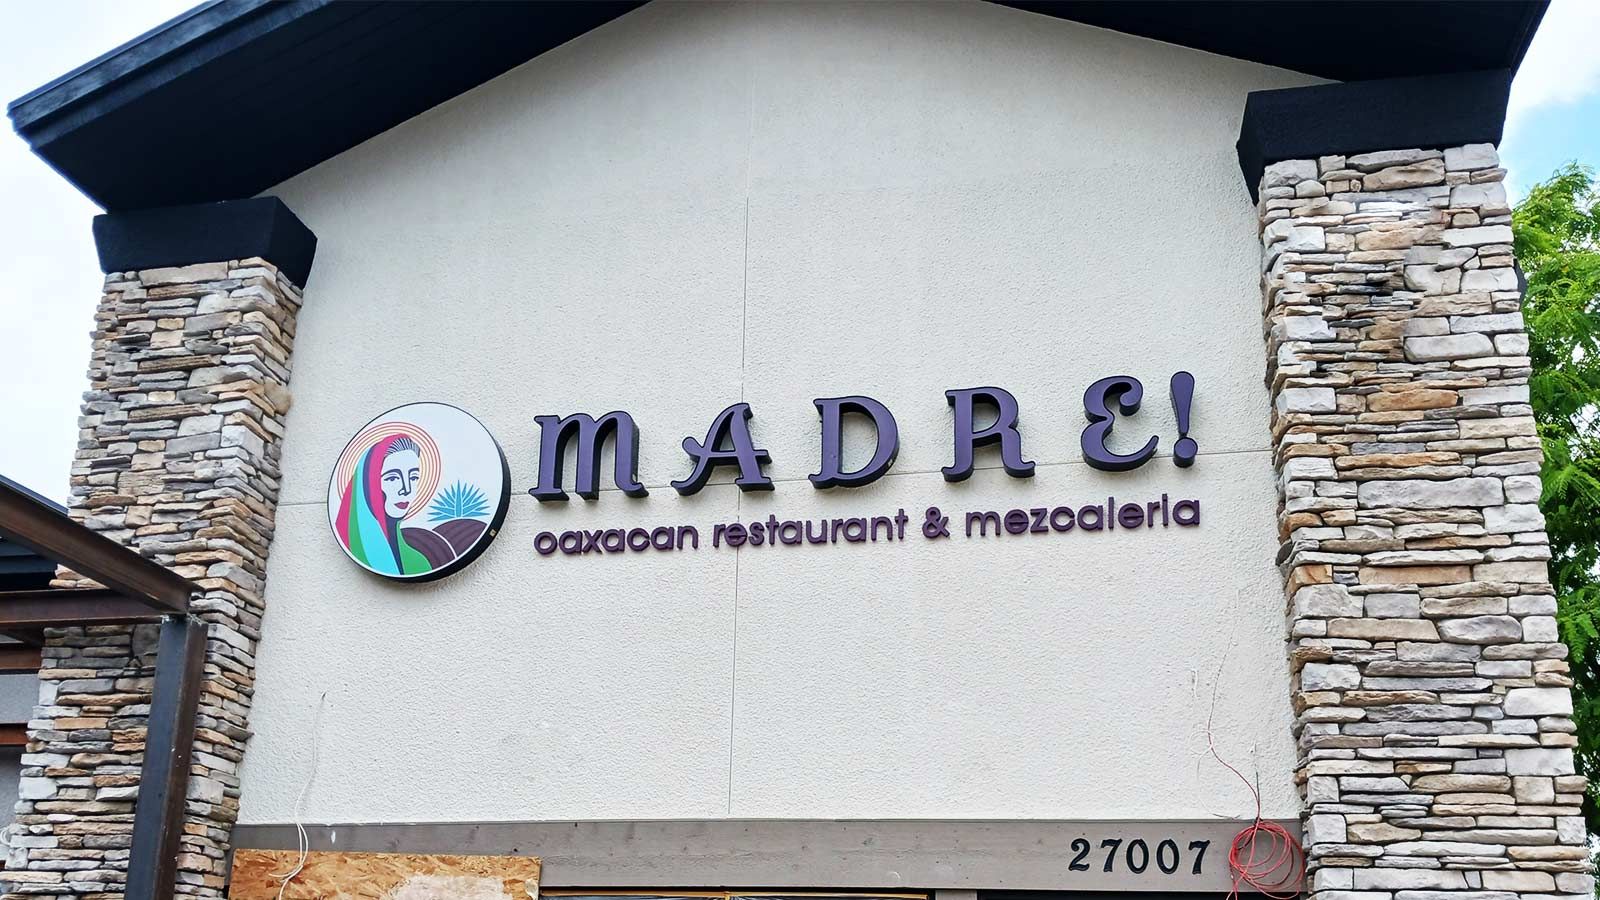 Madre restaurant signs mounted on the facade